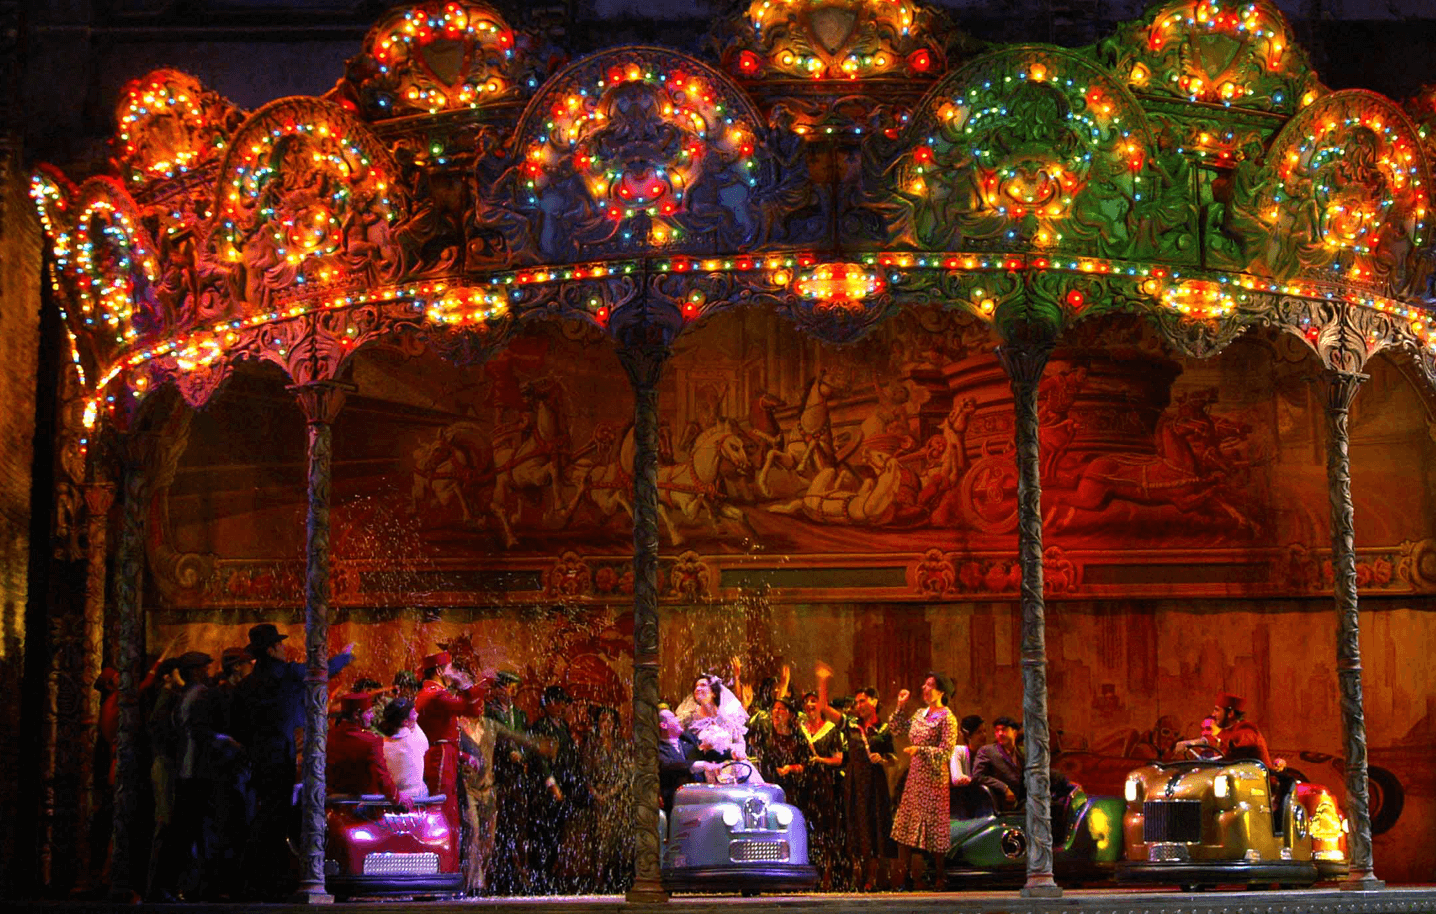 Opera “Don Giovanni” by Mozart. (2005) Photo: Javier at the Real 